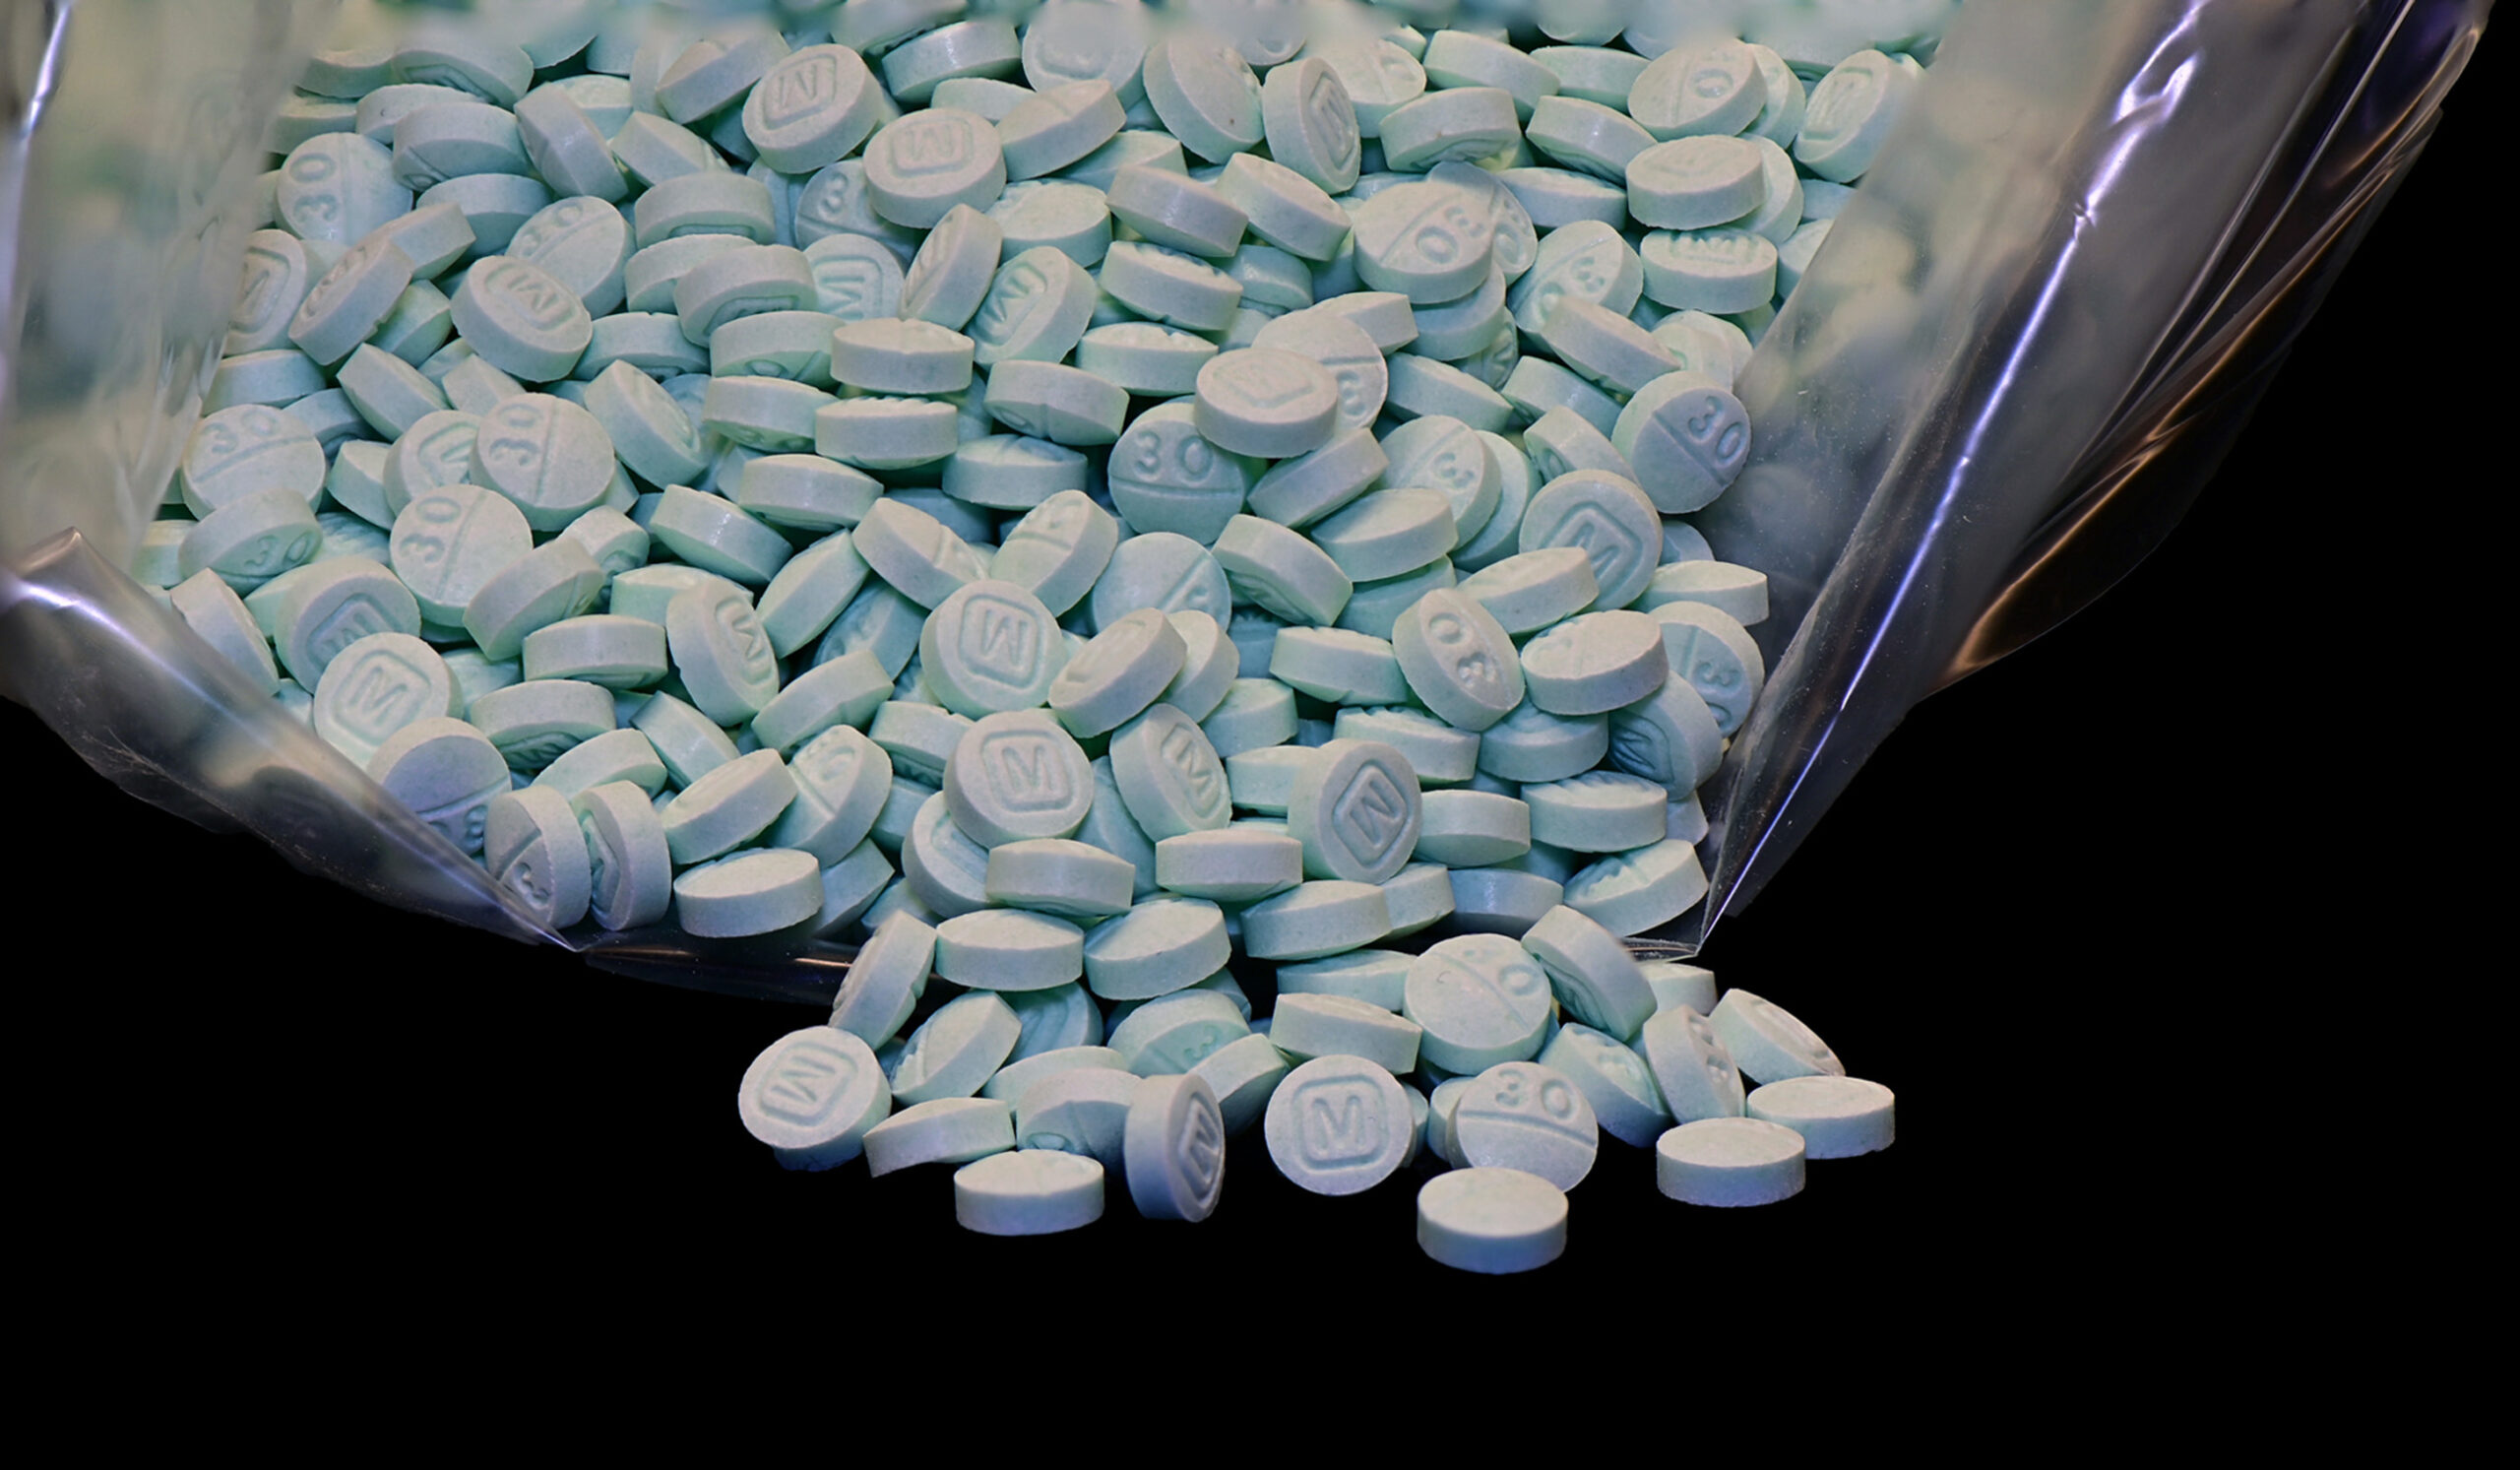 Authorities see surge in fake, deadly pharmaceuticals across